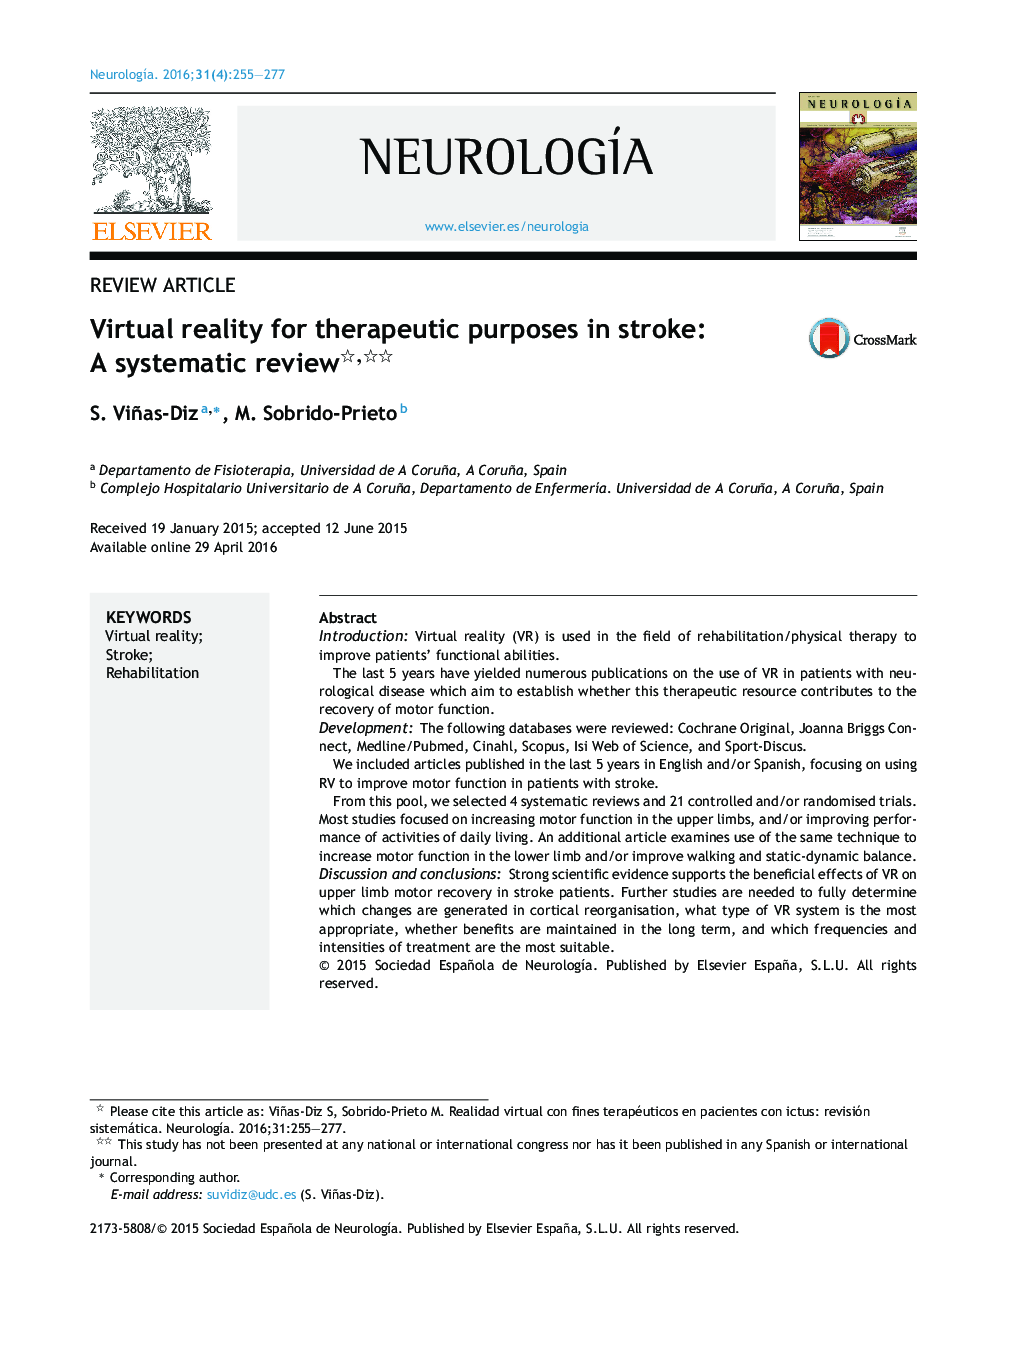 Virtual reality for therapeutic purposes in stroke: A systematic review 